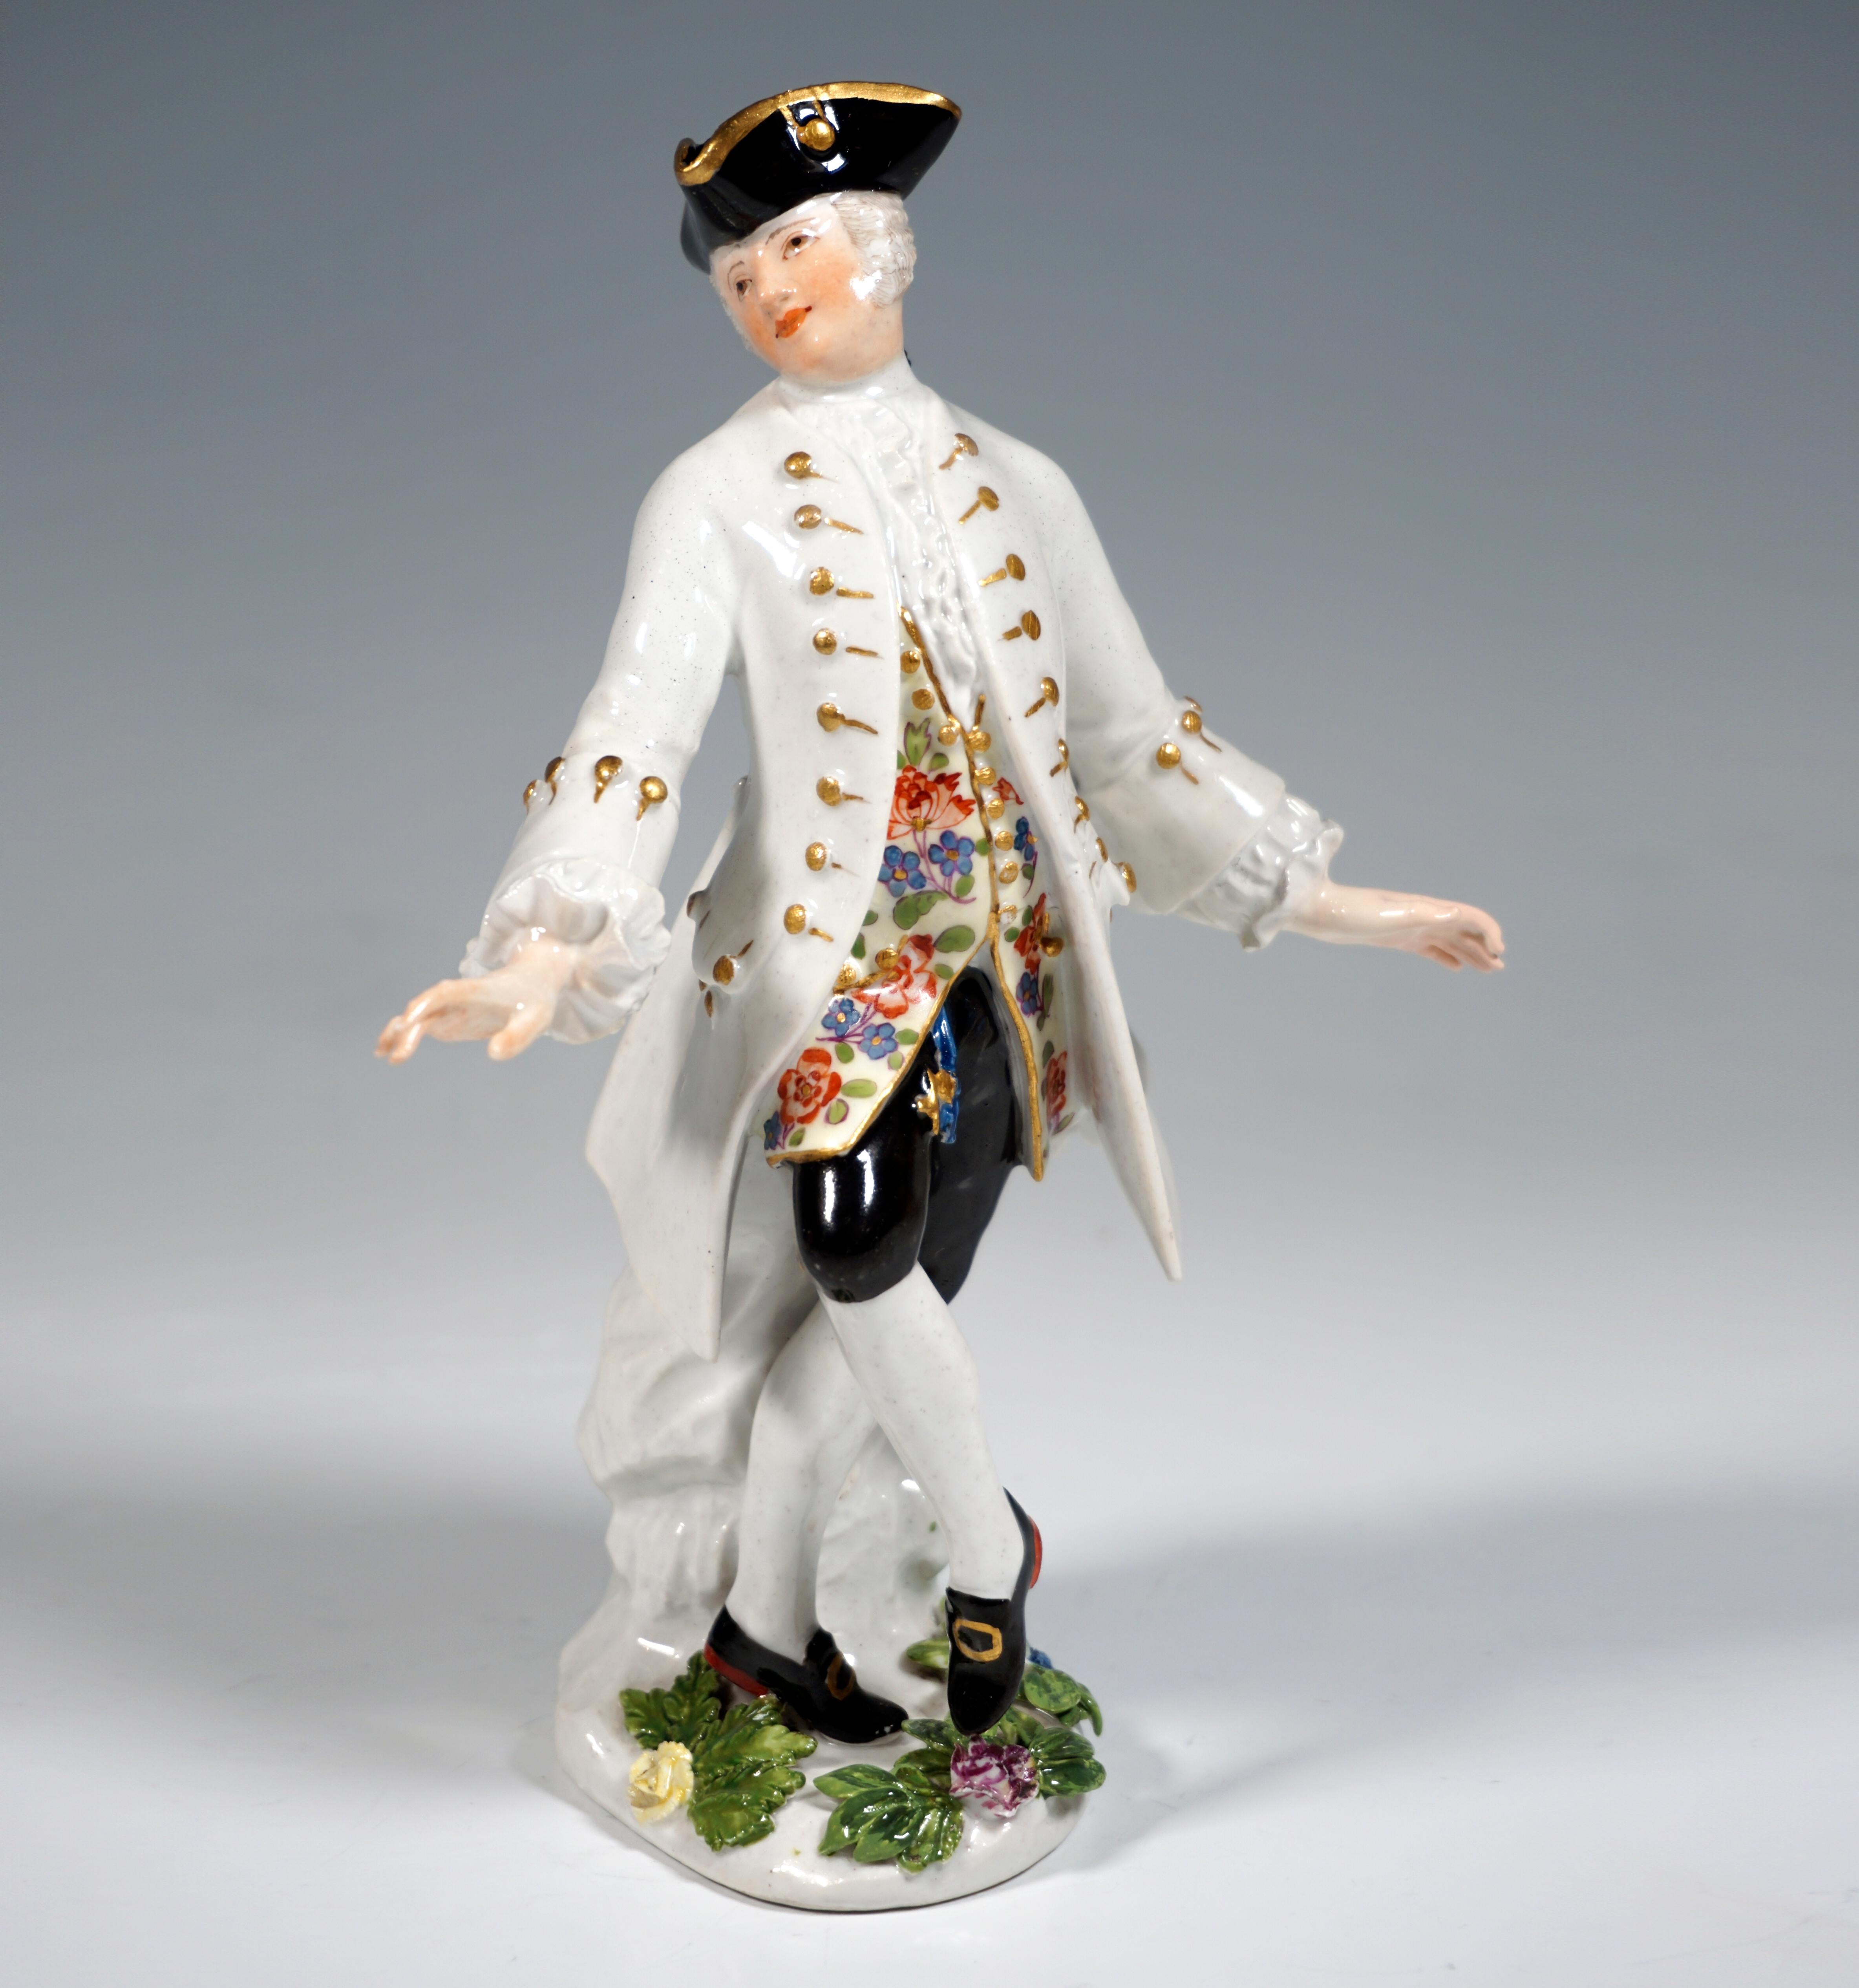 Porcelain Pair of Very Early Meissen Figurines, Dance Couple, Germany, Around 1755